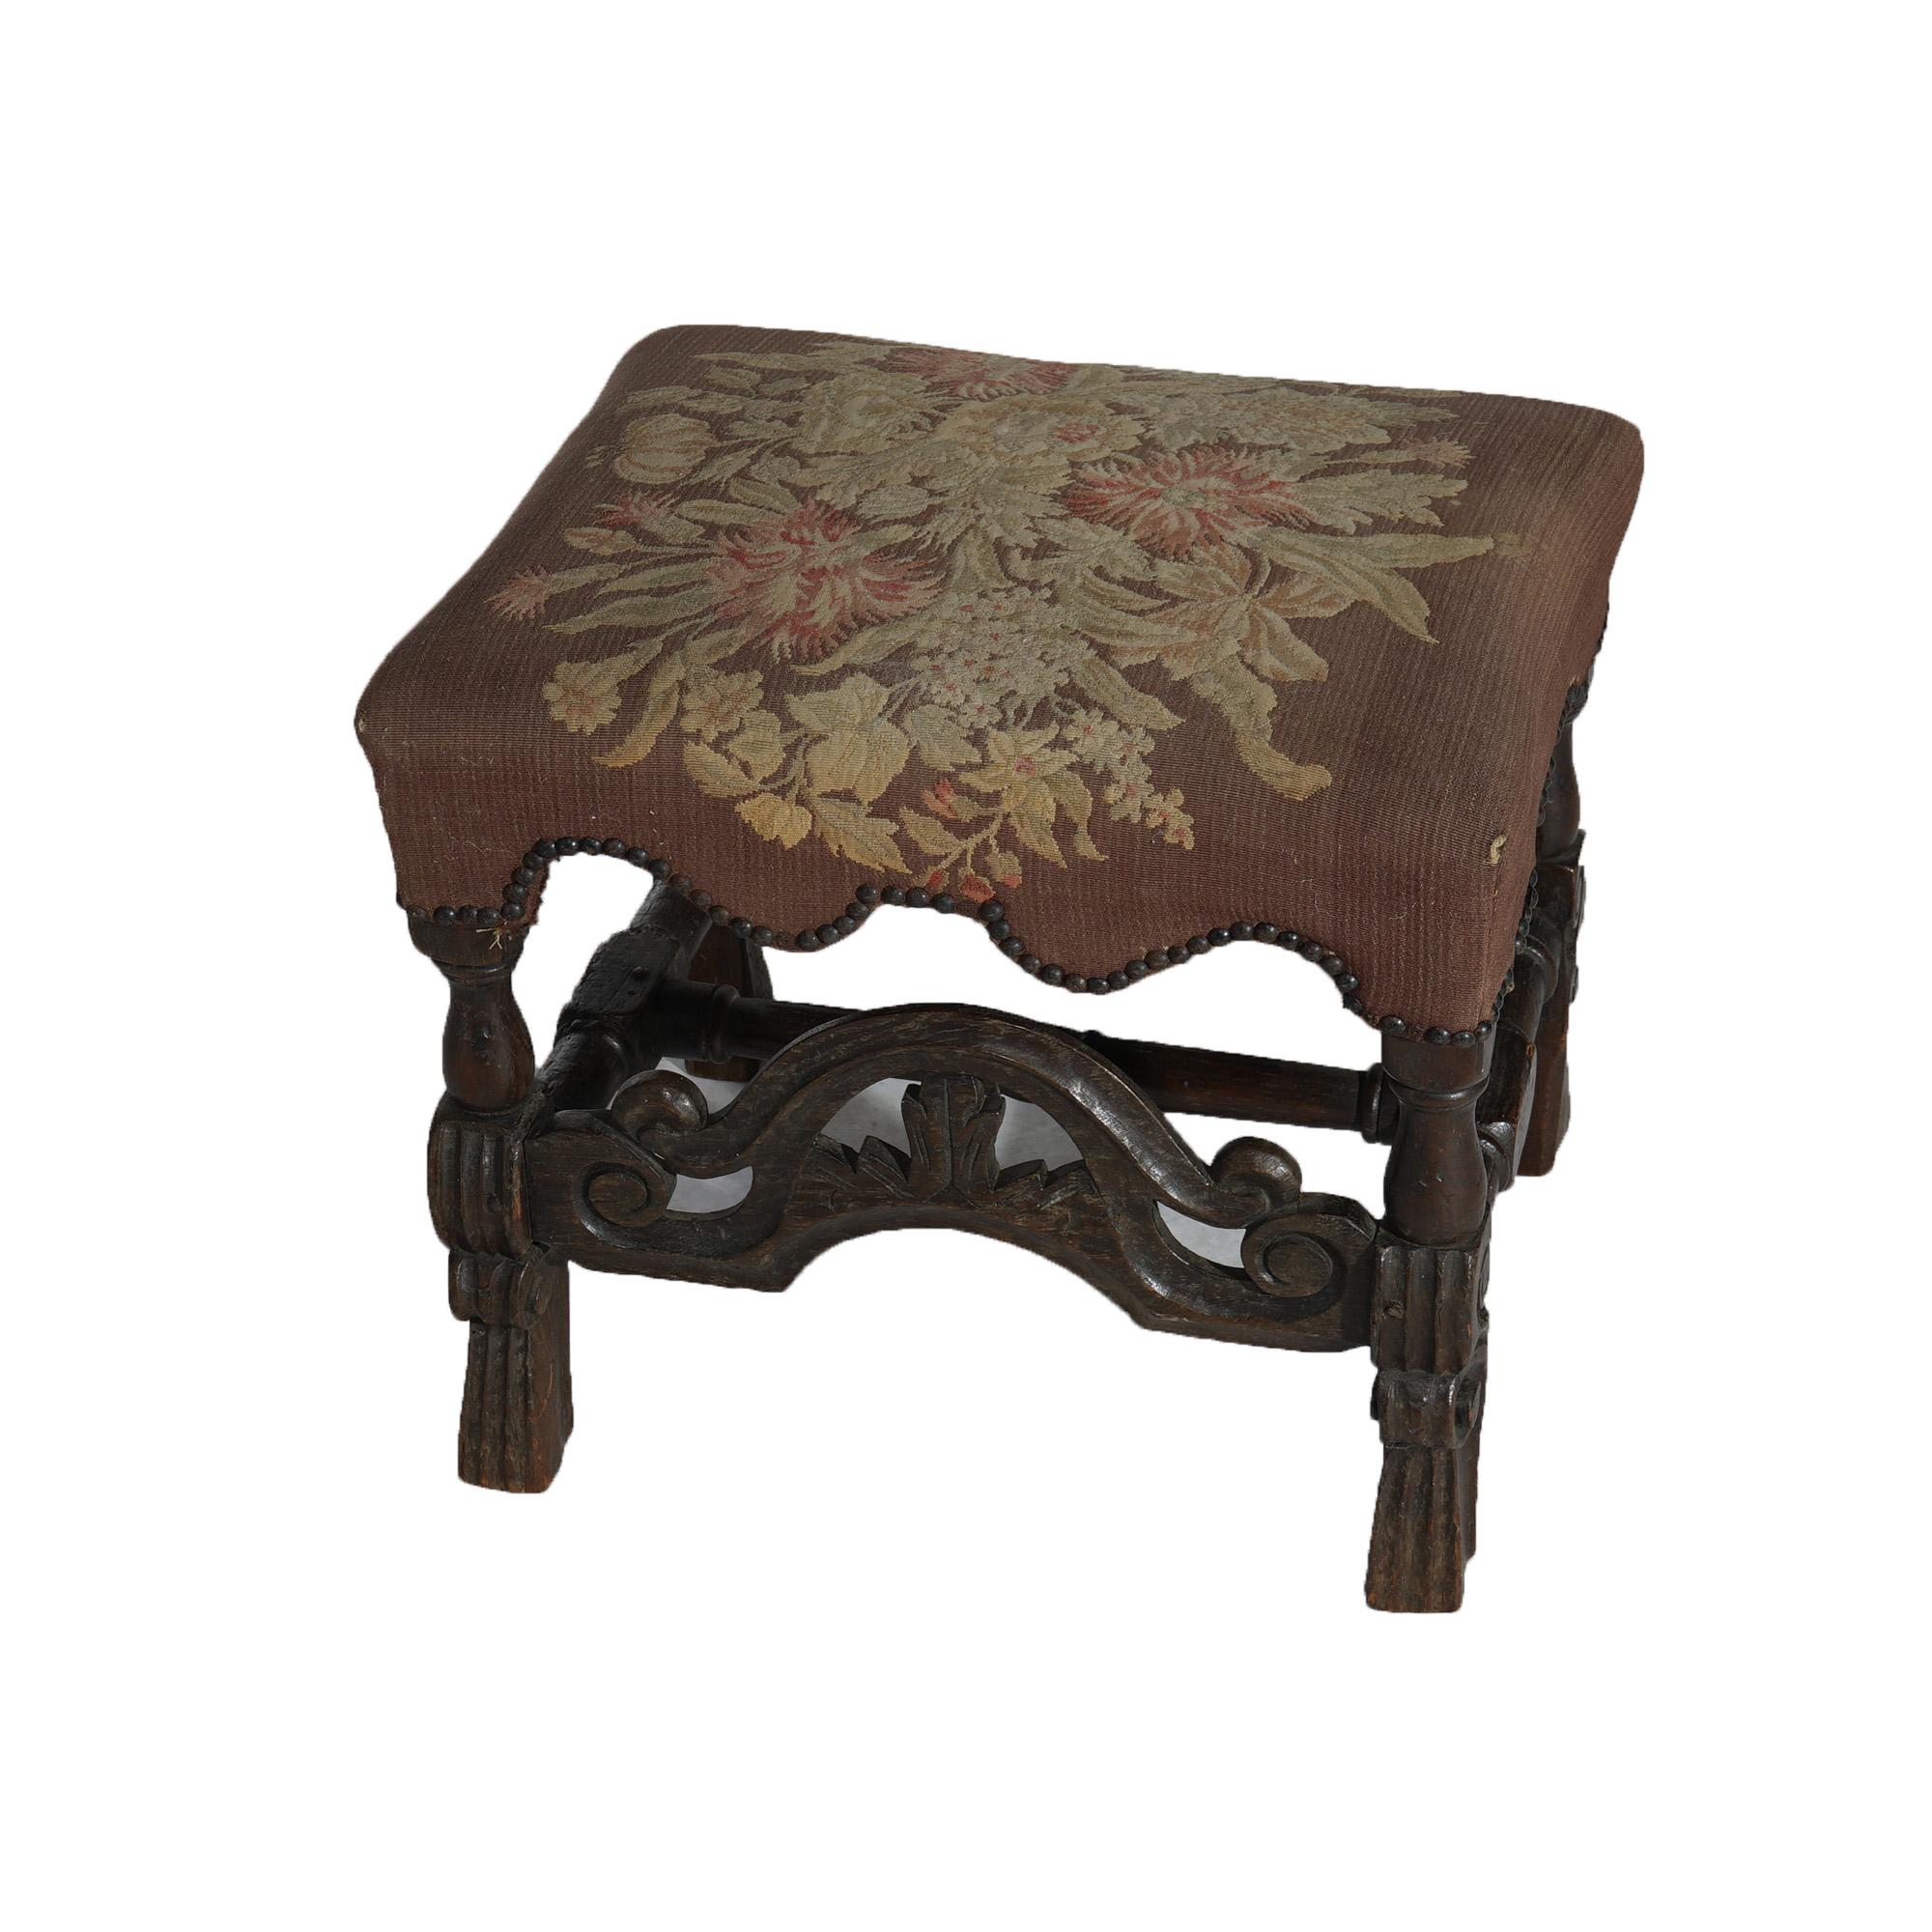 Early Antique English Carved Walnut & Needlepoint Bench (Stool) Circa 1690 For Sale 5